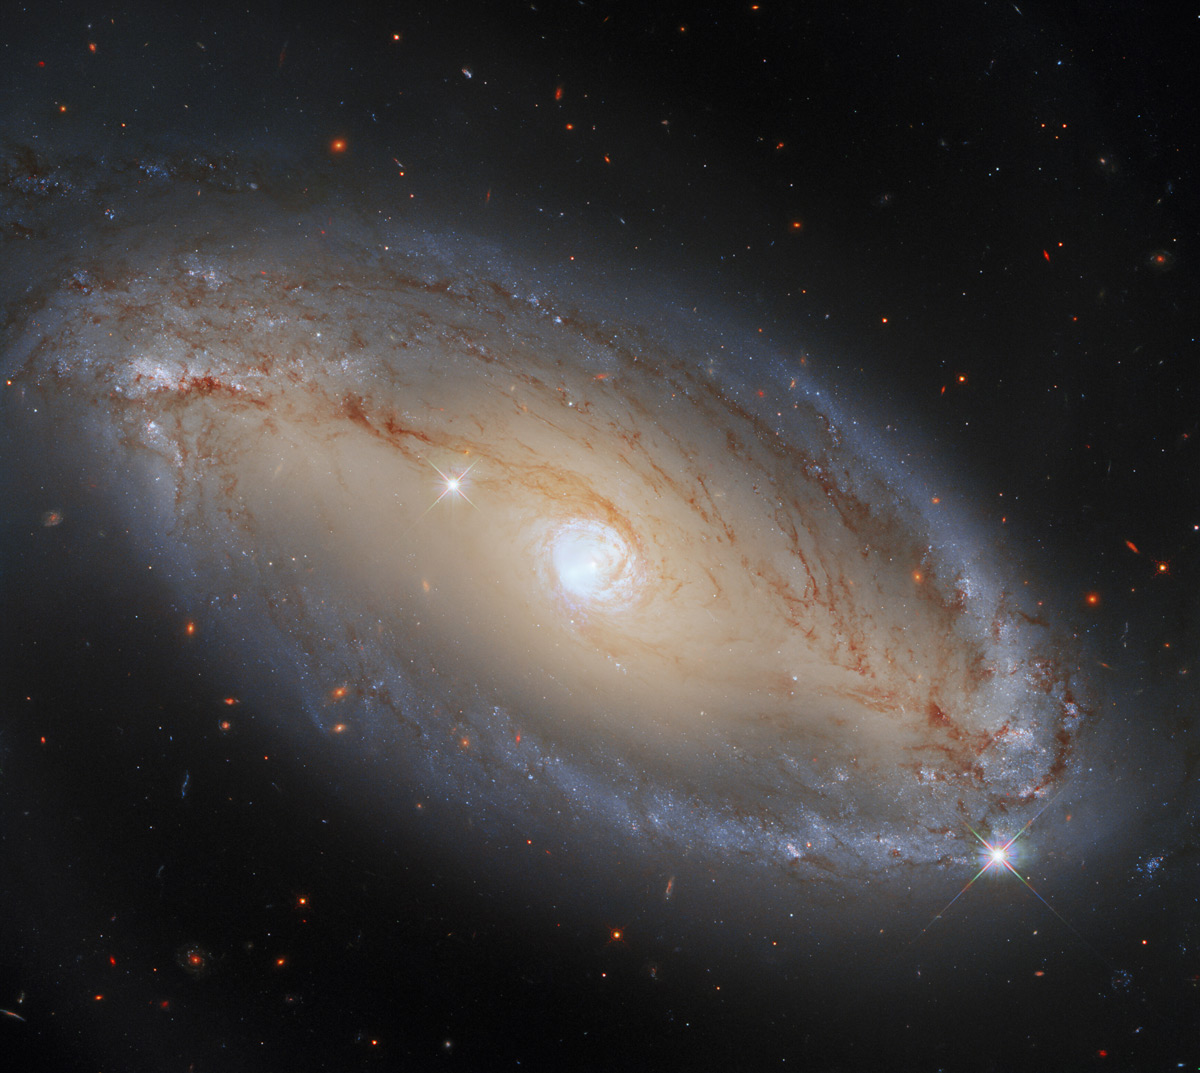 In this image, NCG 5728 appears to be an elegant, luminous, barred spiral galaxy. 